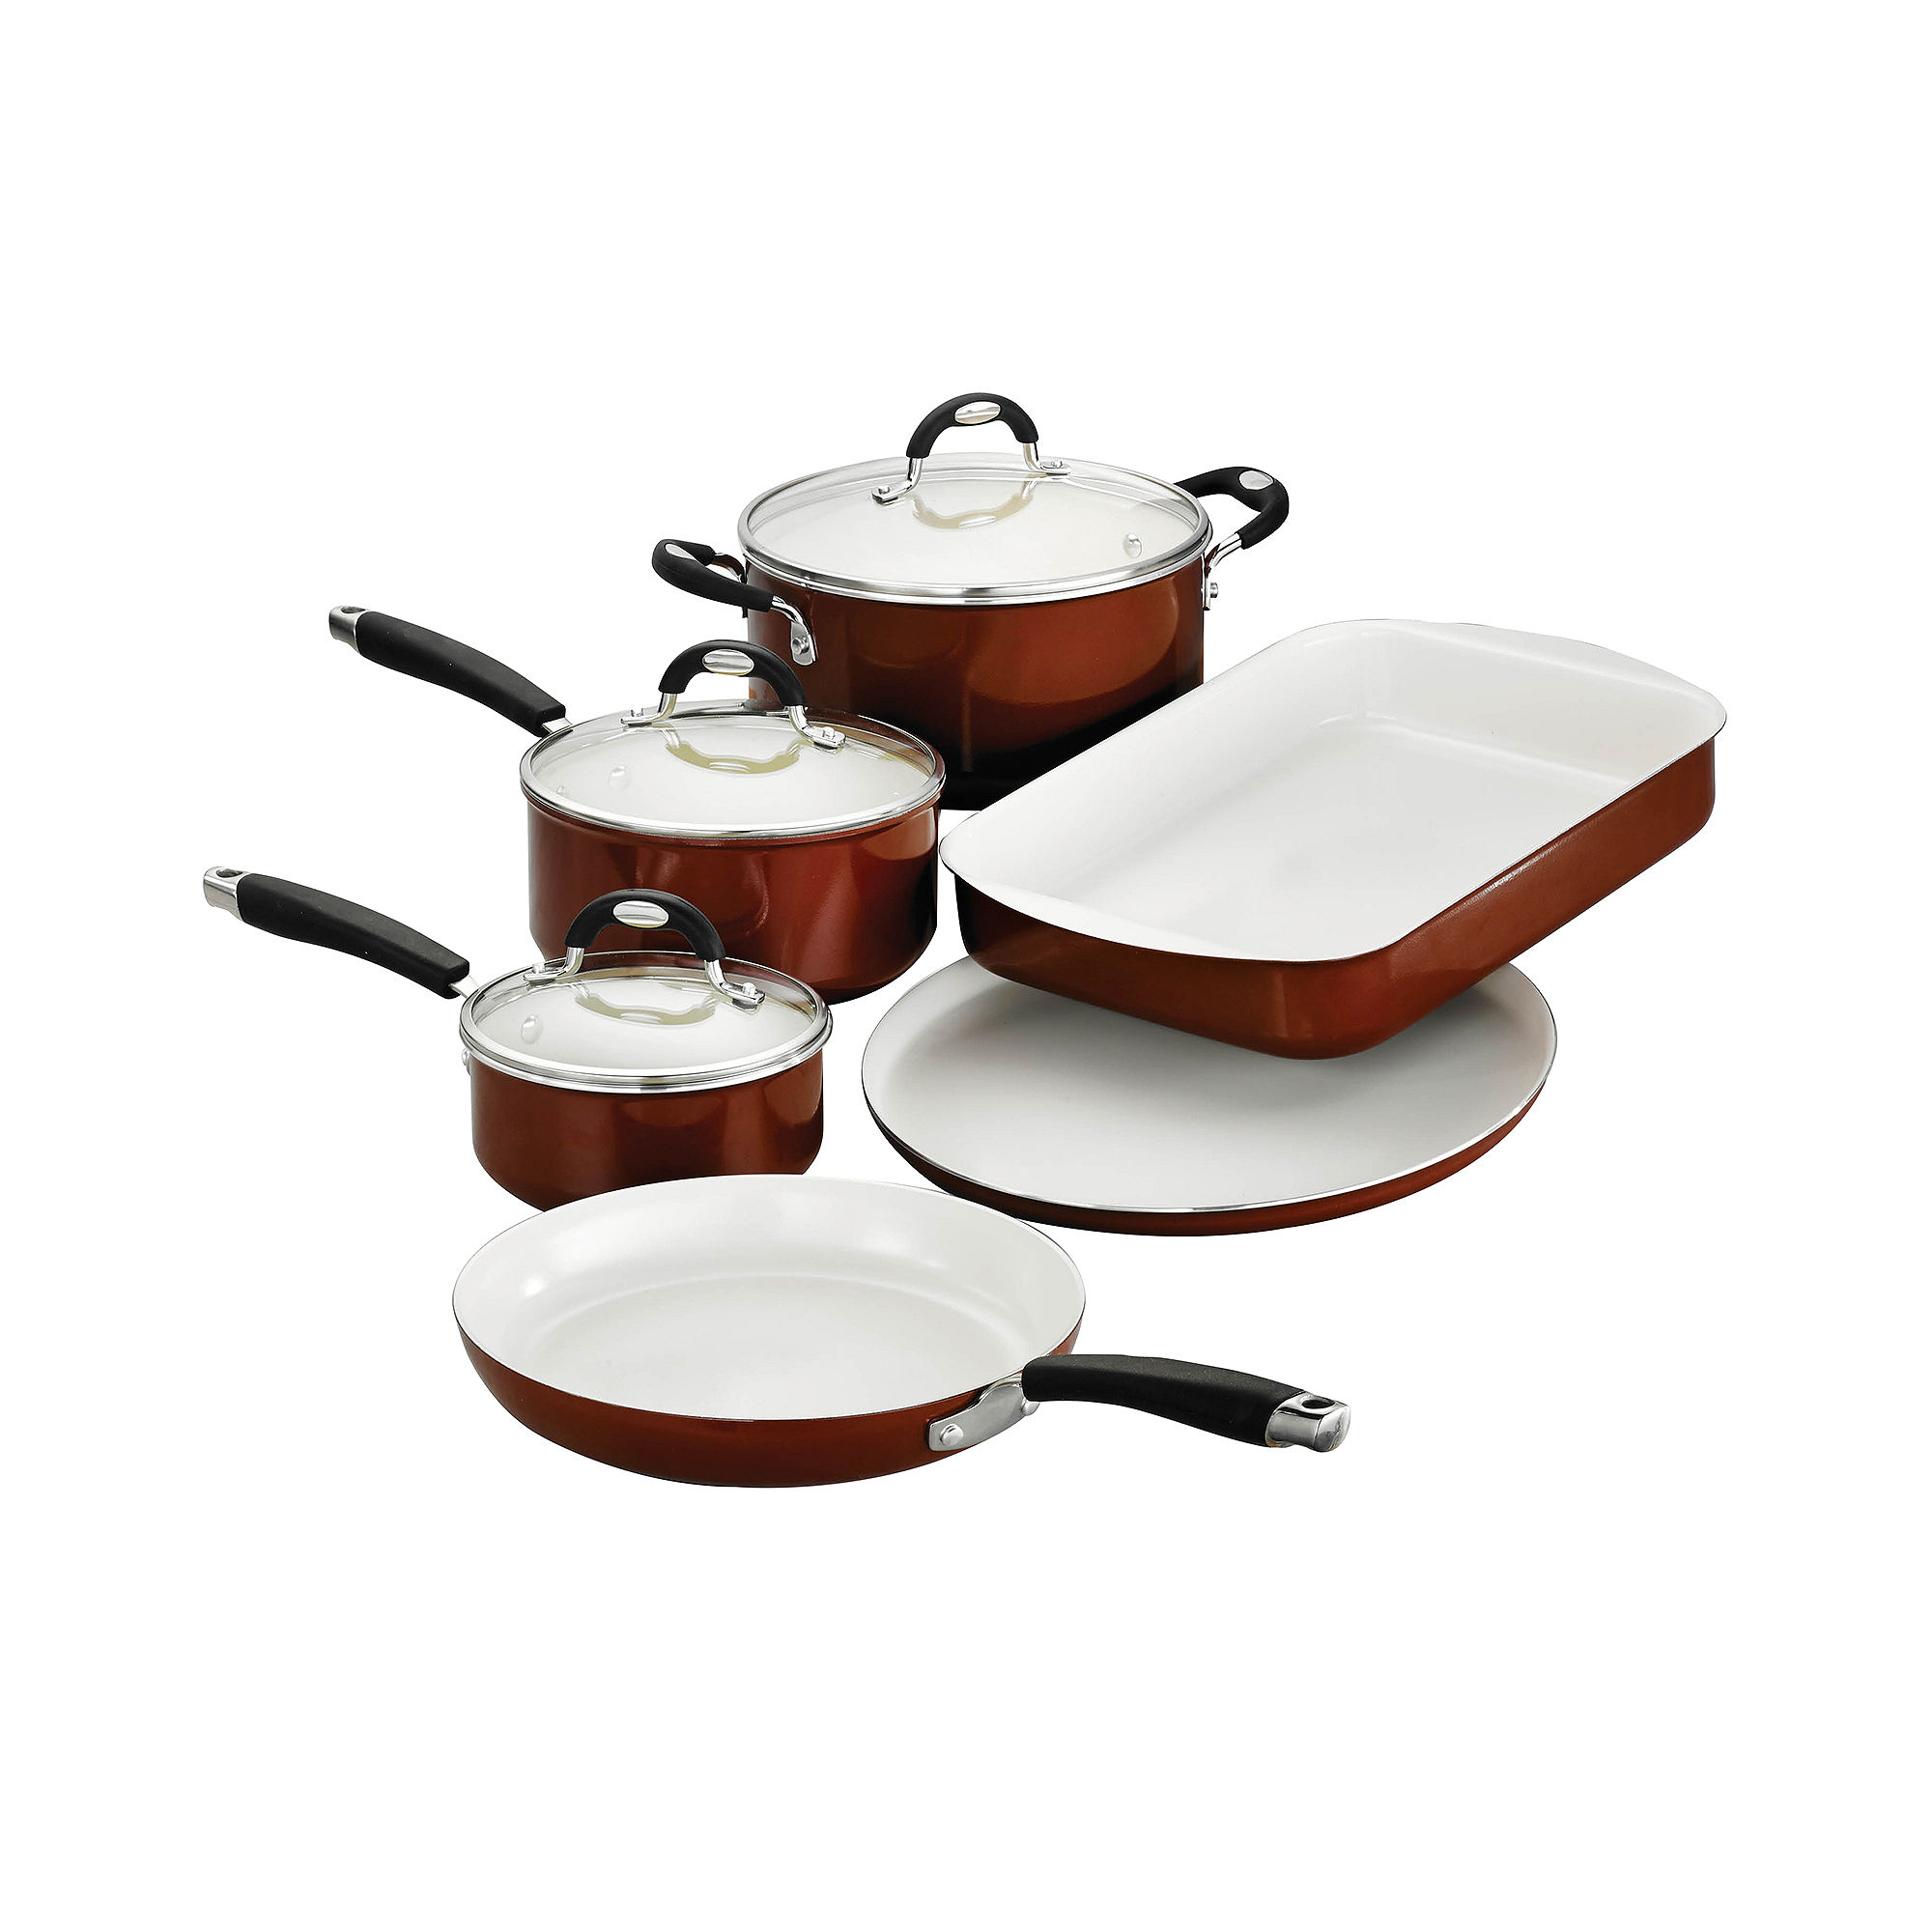 Tramontina Style Ceramica 9-pc. Metallic Copper Cookware and Bakeware Set